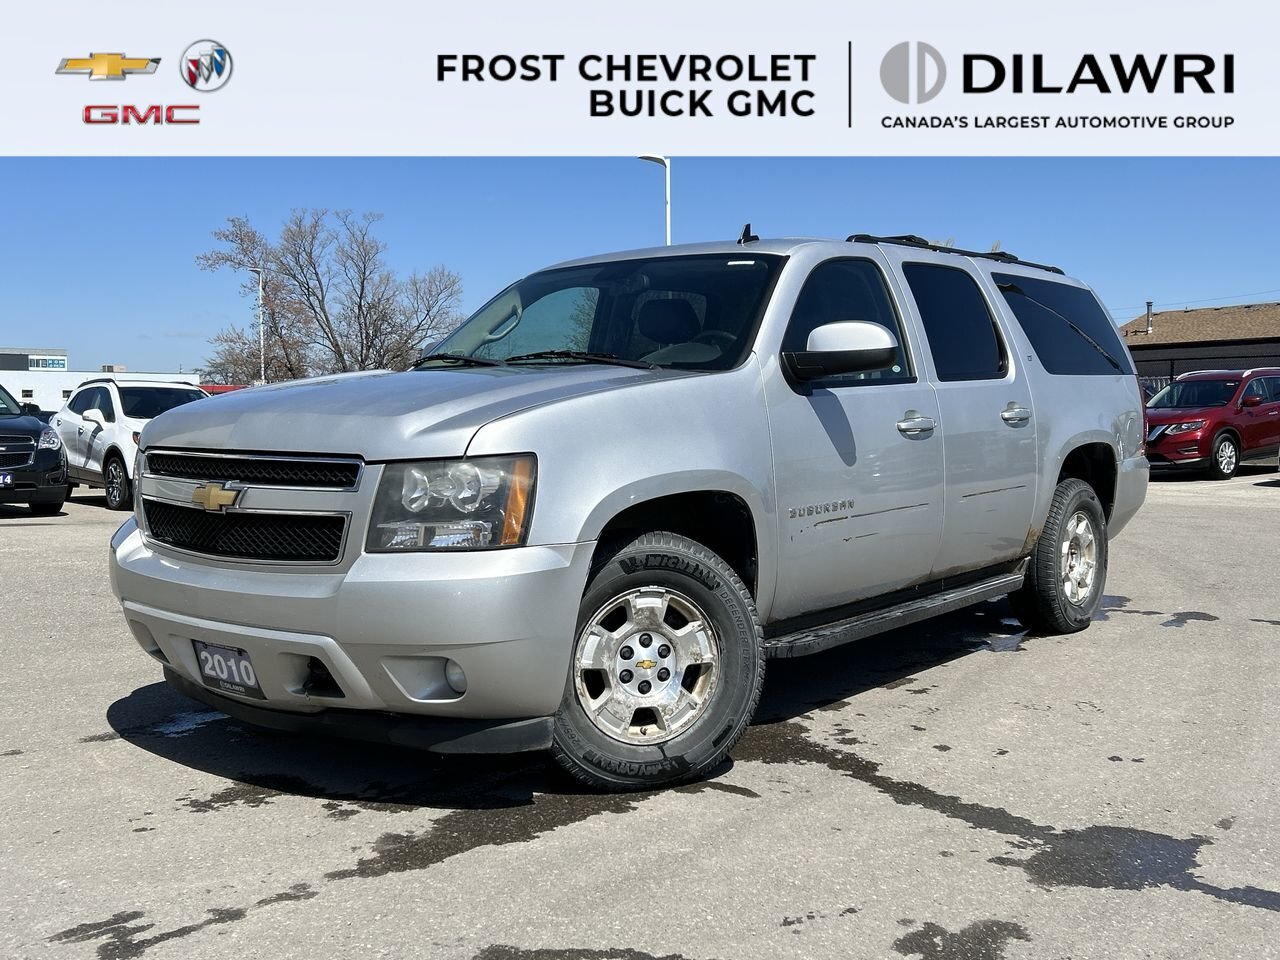 2010 Chevrolet Suburban 1500 LT 4WD As Is I Clean Carfax I 8 Passenger I L